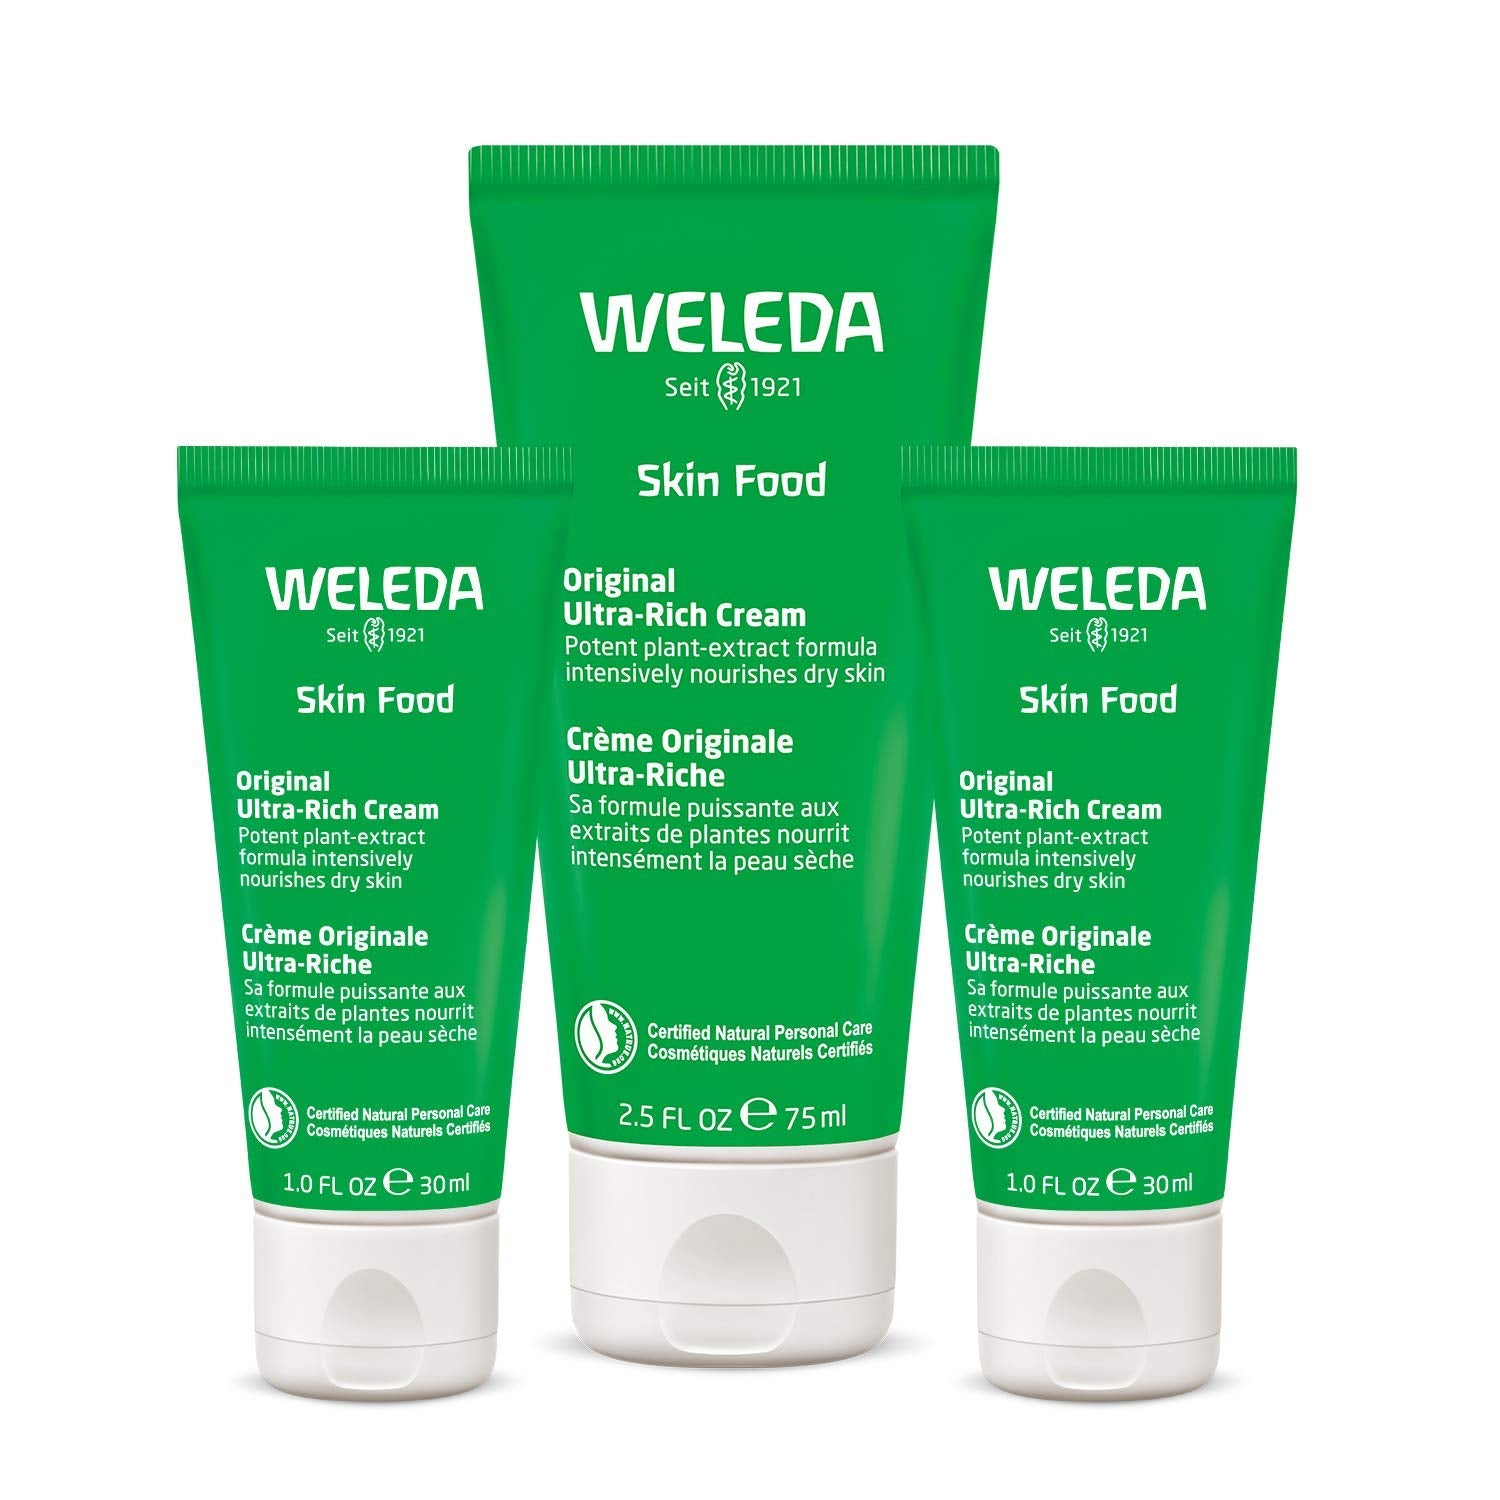 Weleda Skin Food Original Ultra-Rich Body Cream Trio, 3 Piece Set, 2.5 Fluid Ounce (Pack of 1), 1 Fluid Ounce (Pack of 2), Plant Rich Moisturizer and Lip Care with Chamomile and Calendula